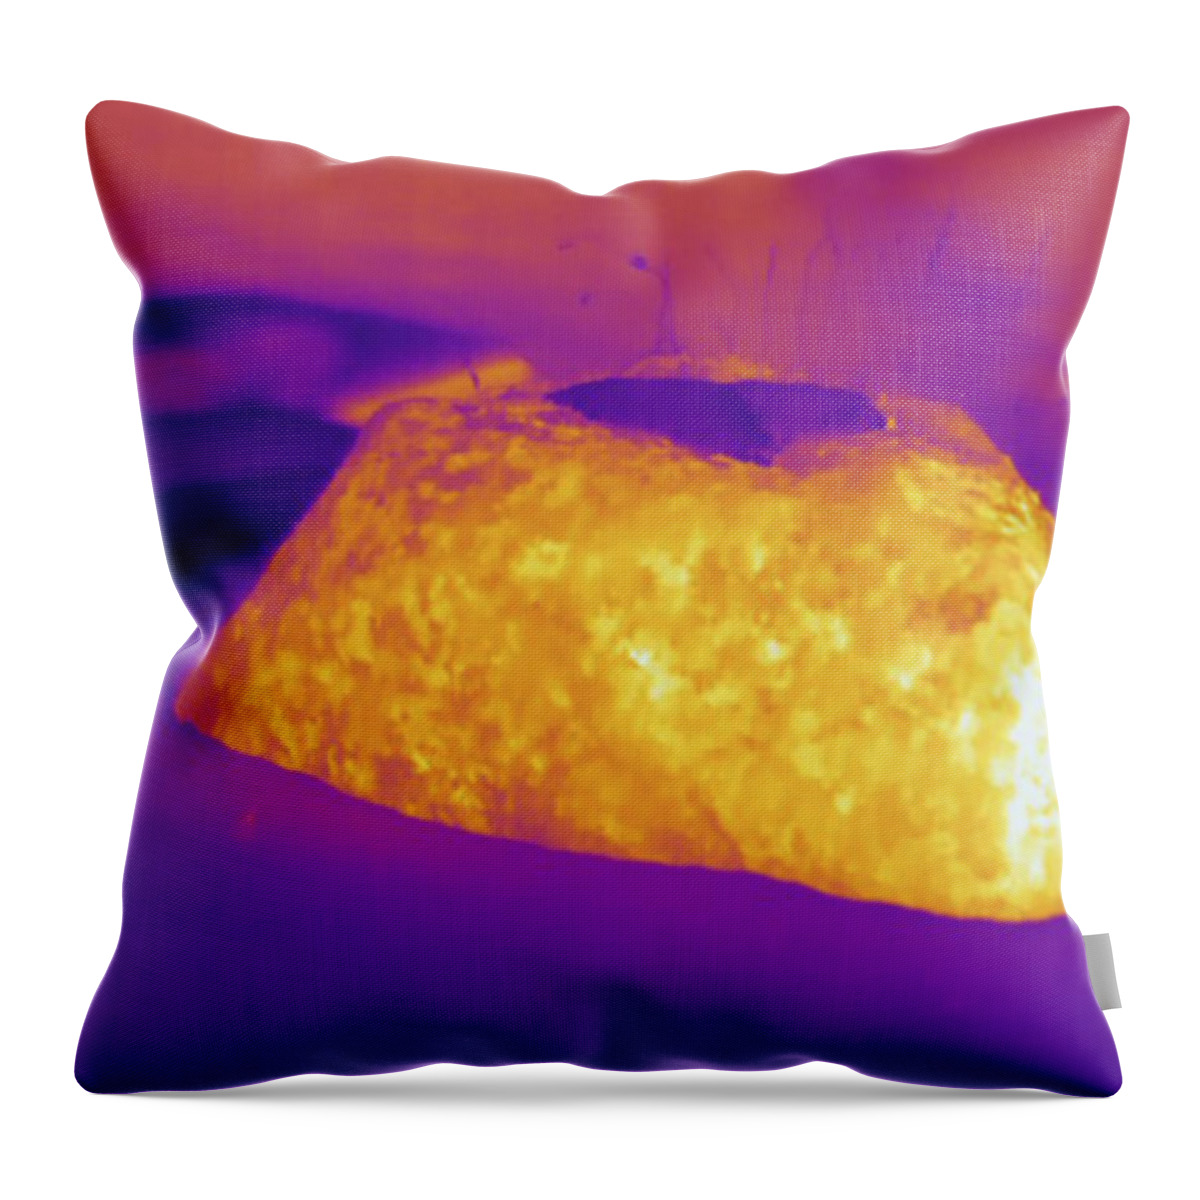 Thermography Throw Pillow featuring the photograph Rock In Snow, Thermogram by Science Stock Photography